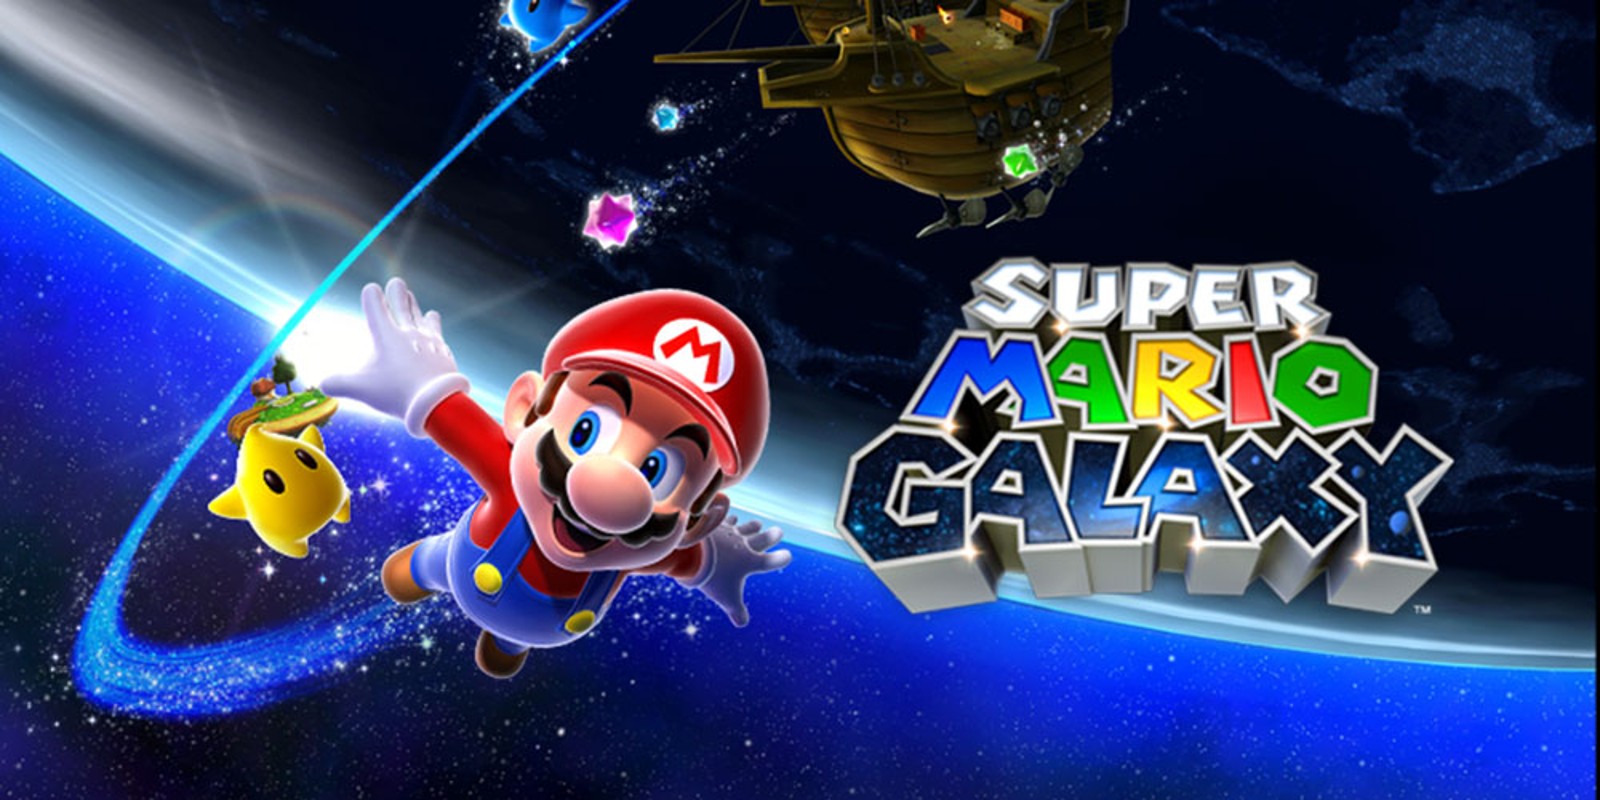 SI_Wii_SuperMarioGalaxy_image1600w